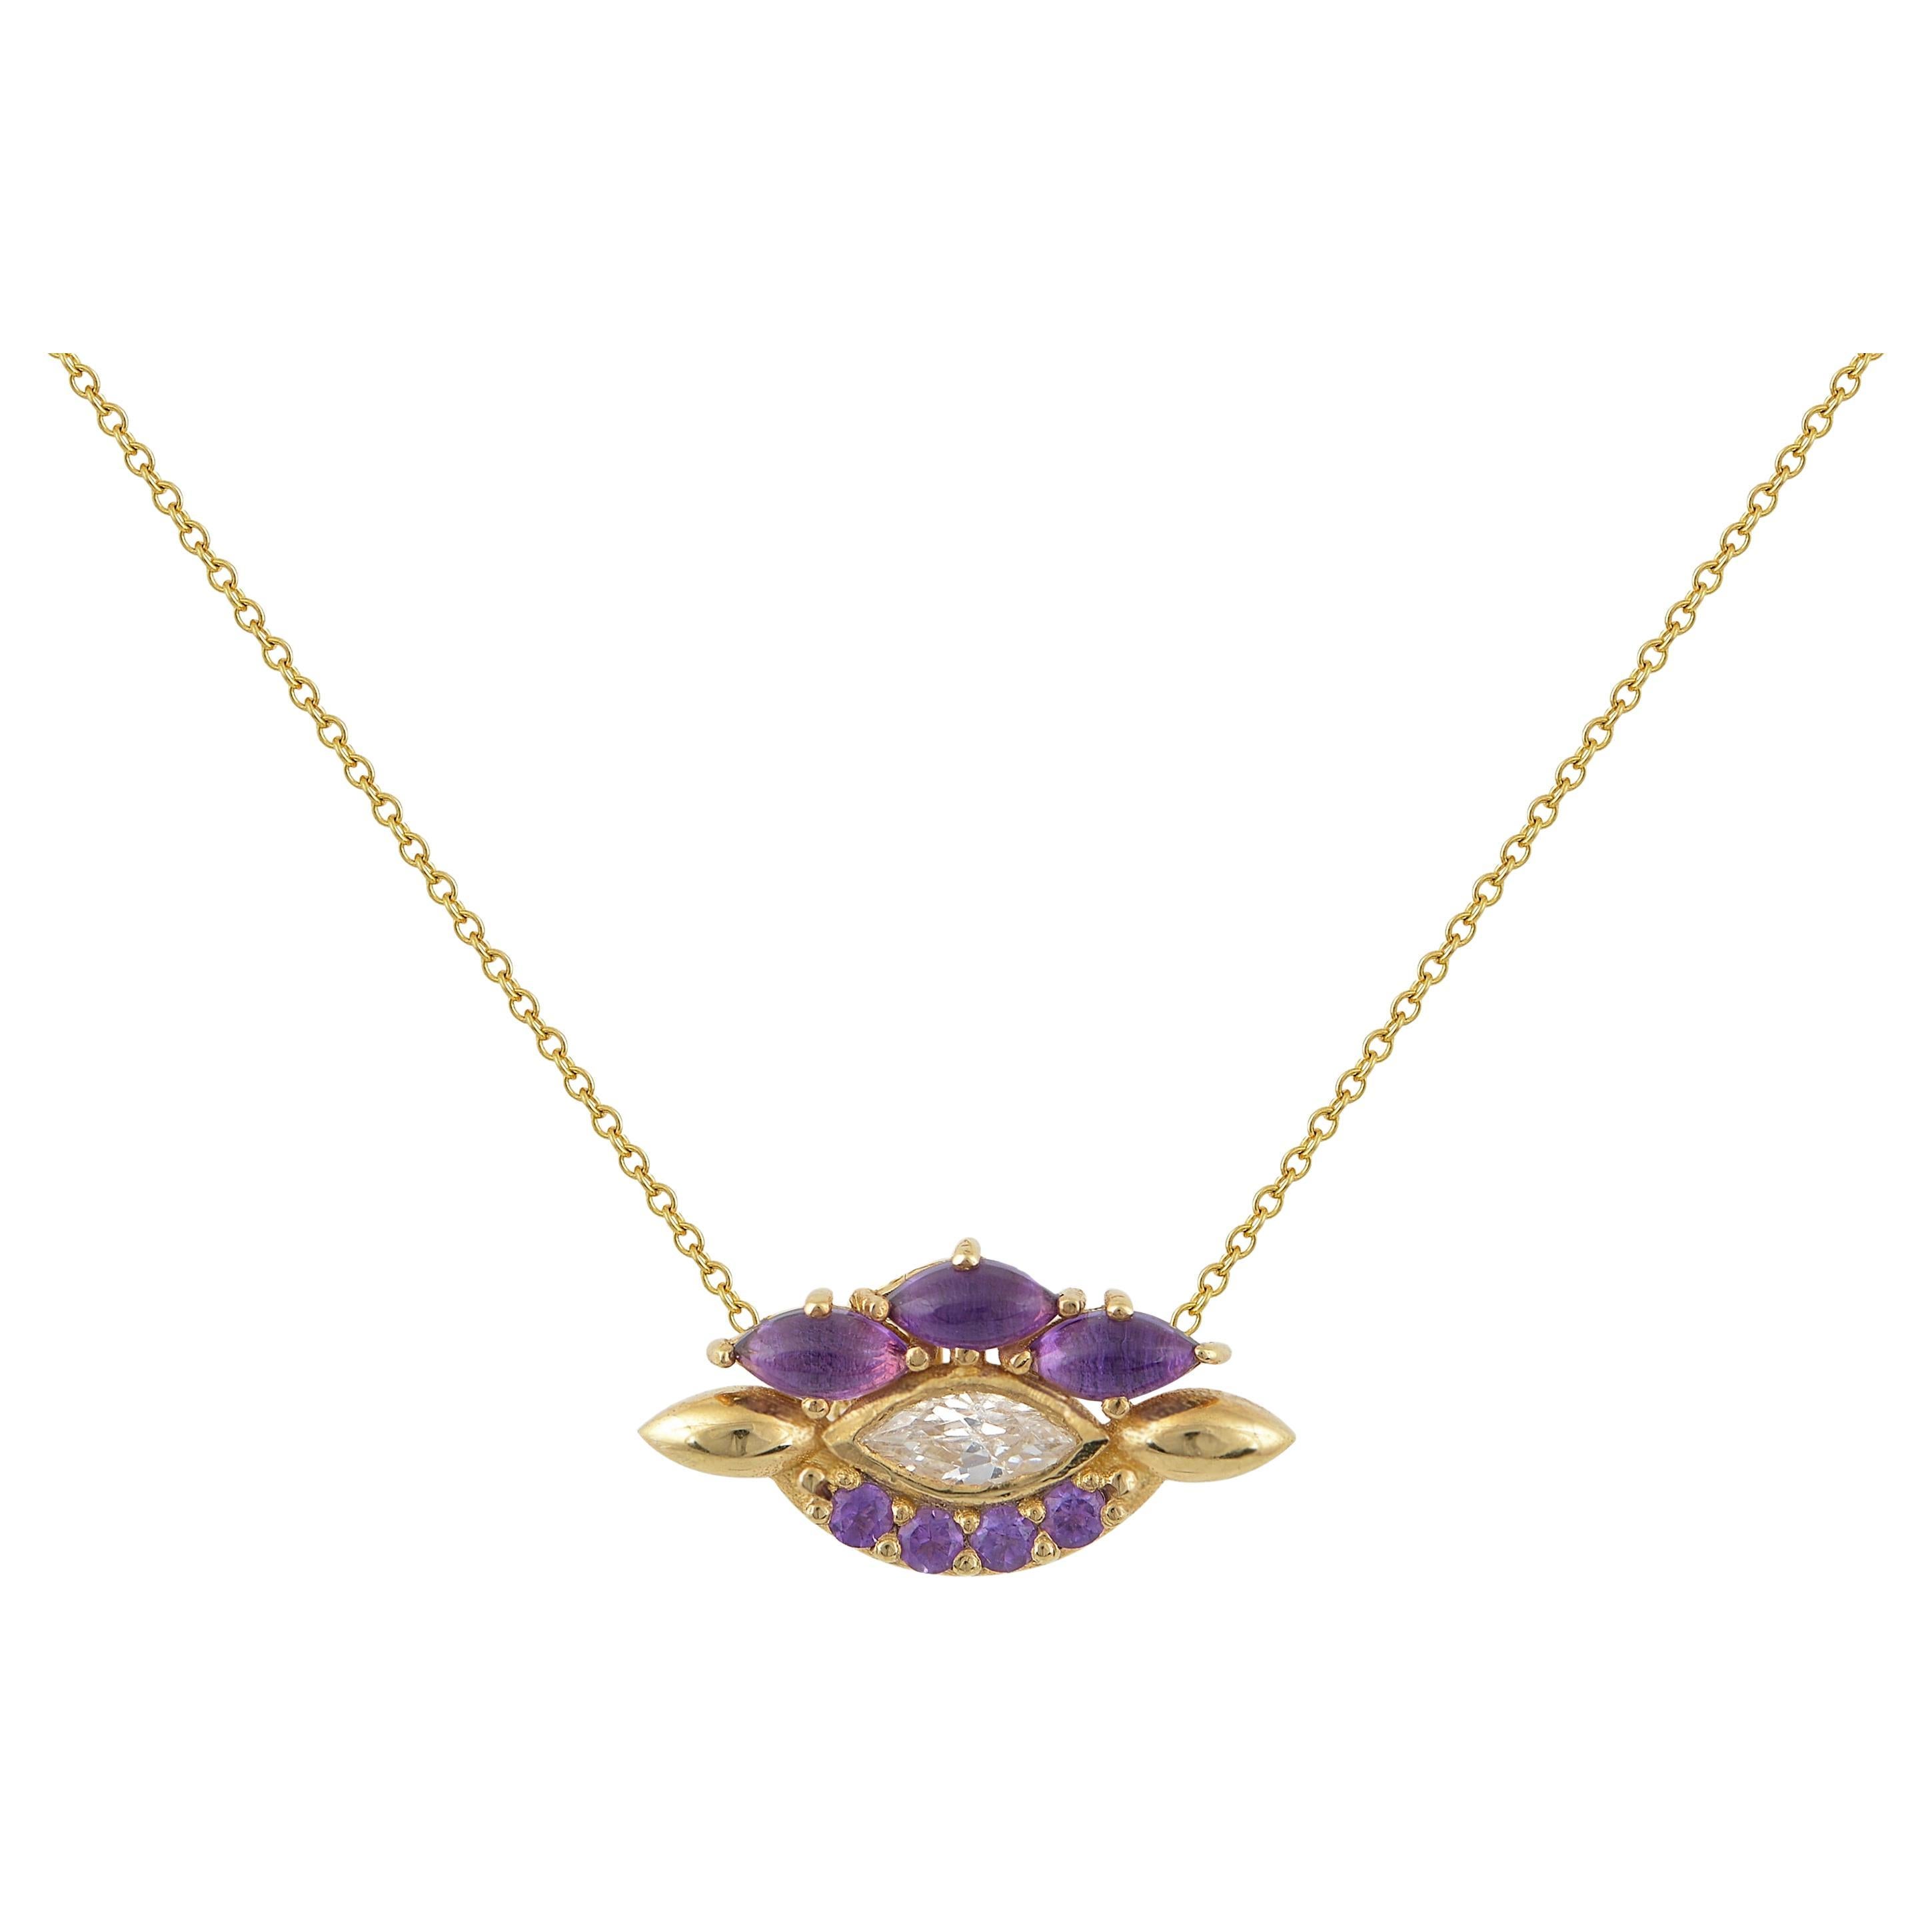 Eye Pendant in 18 Karat Yellow Gold With A Pear Shaped Diamond And Amethysts